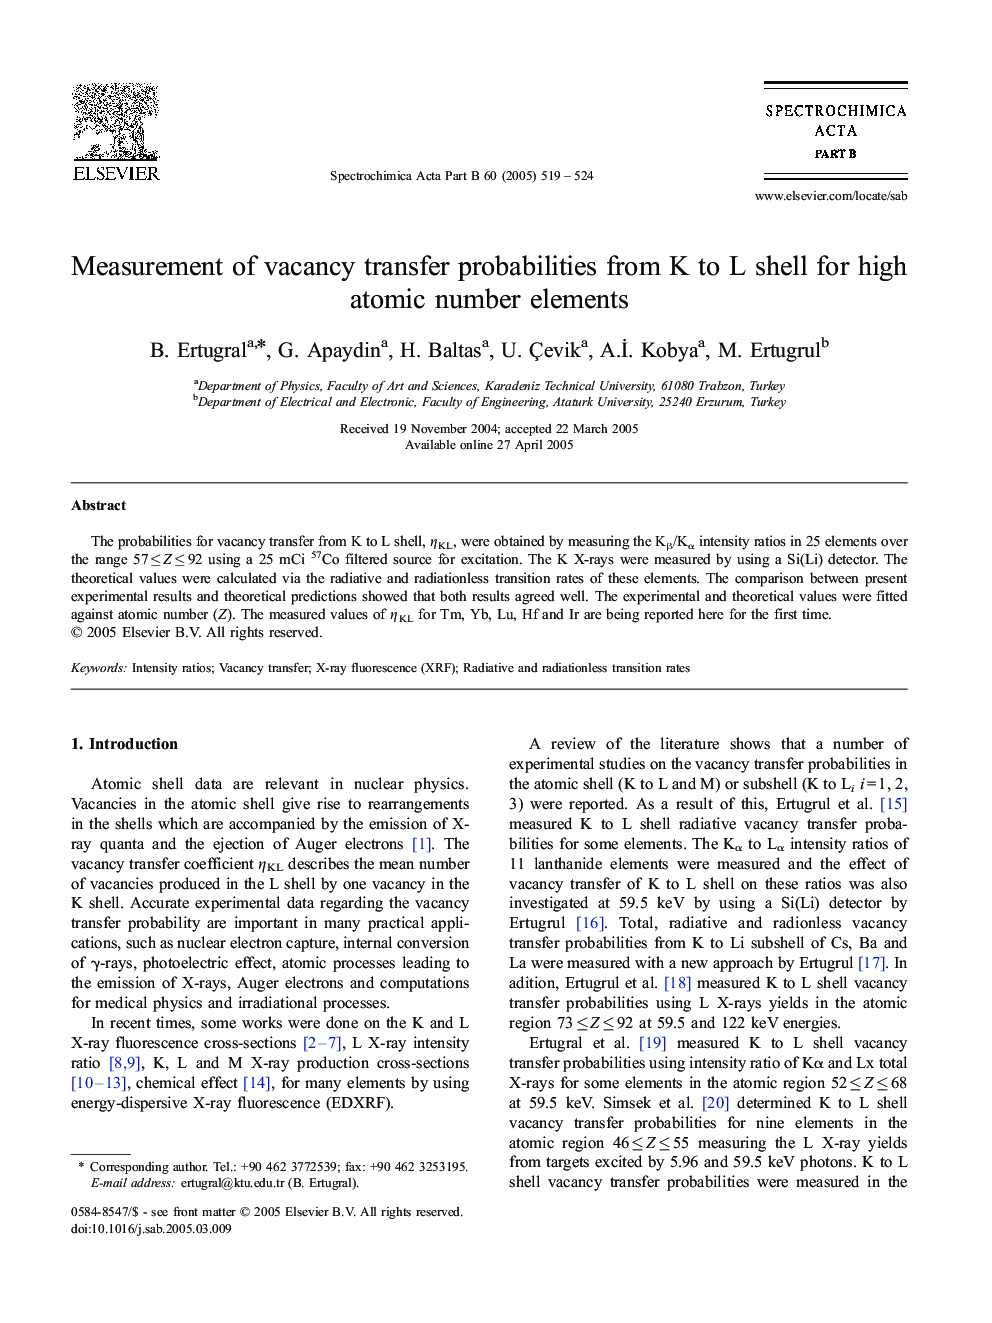 Measurement of vacancy transfer probabilities from K to L shell for high atomic number elements